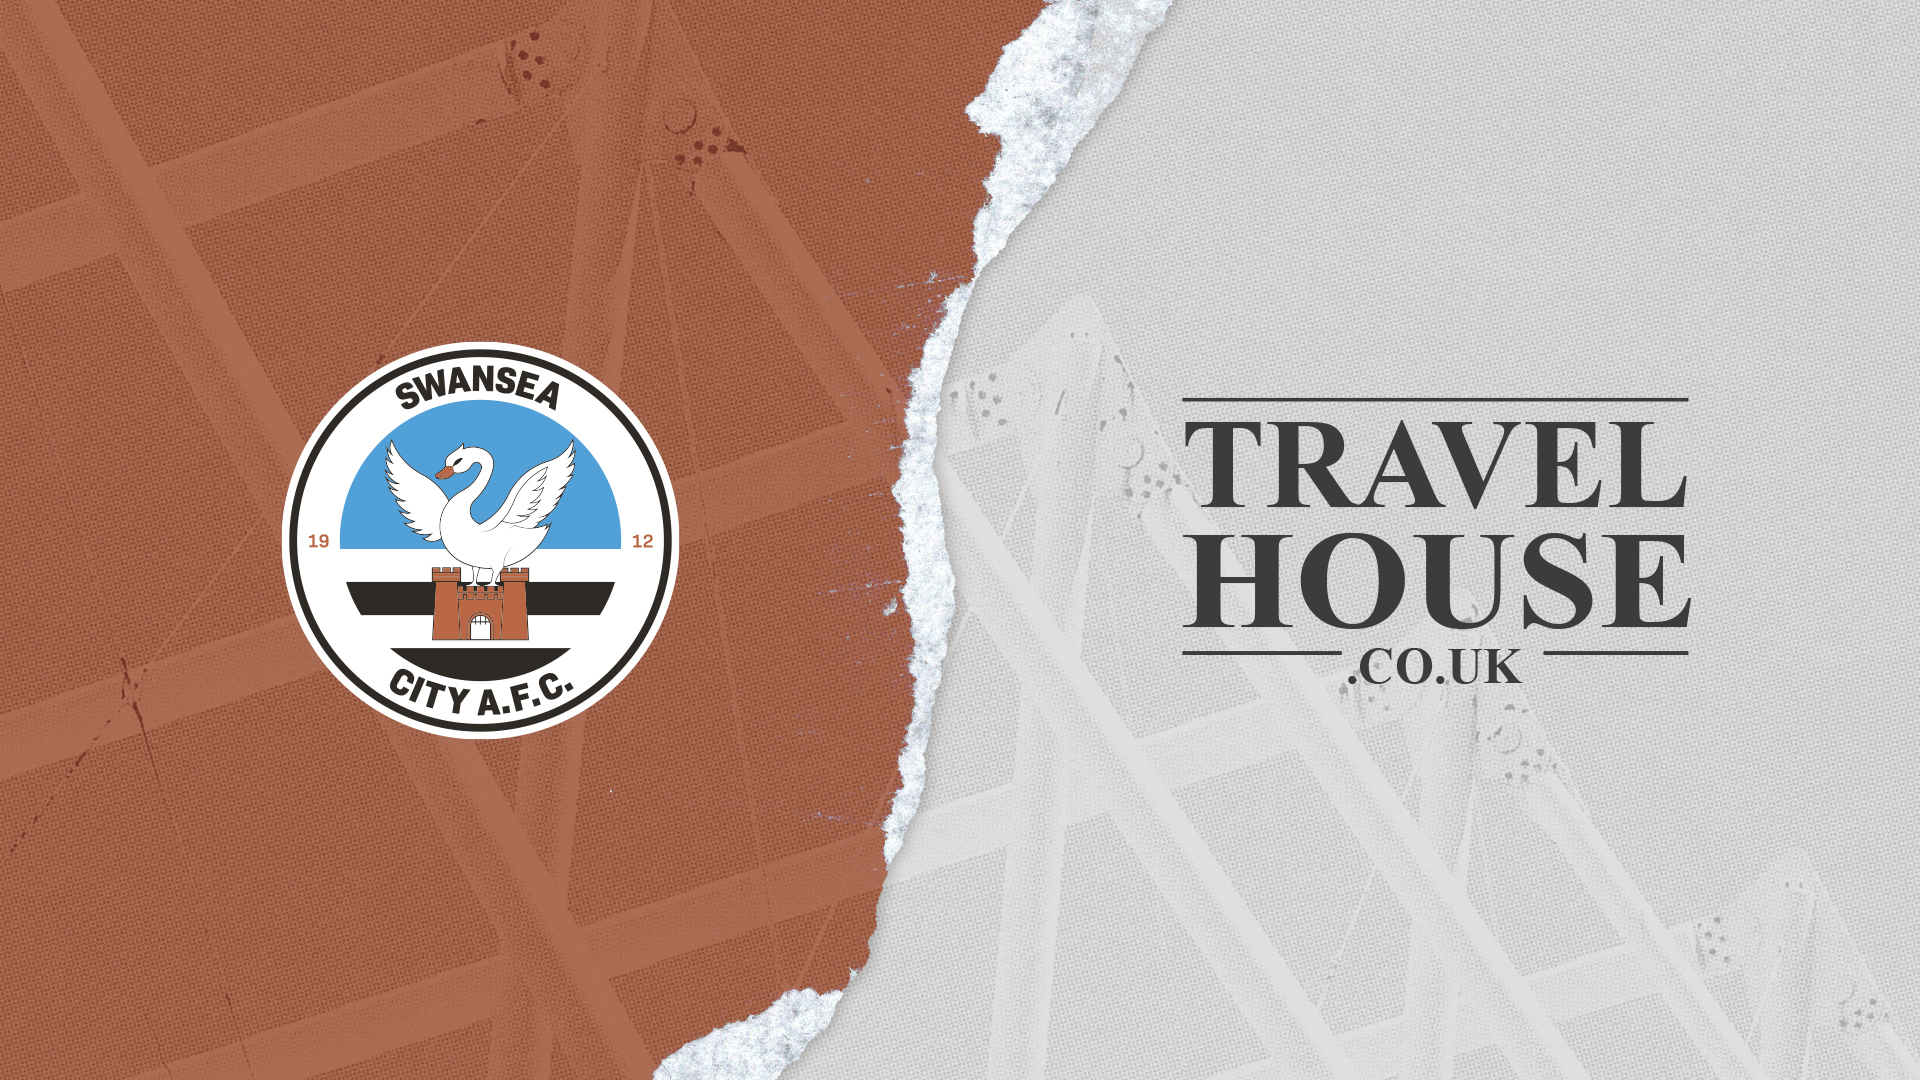 Swansea City logo and the Travel House graphic